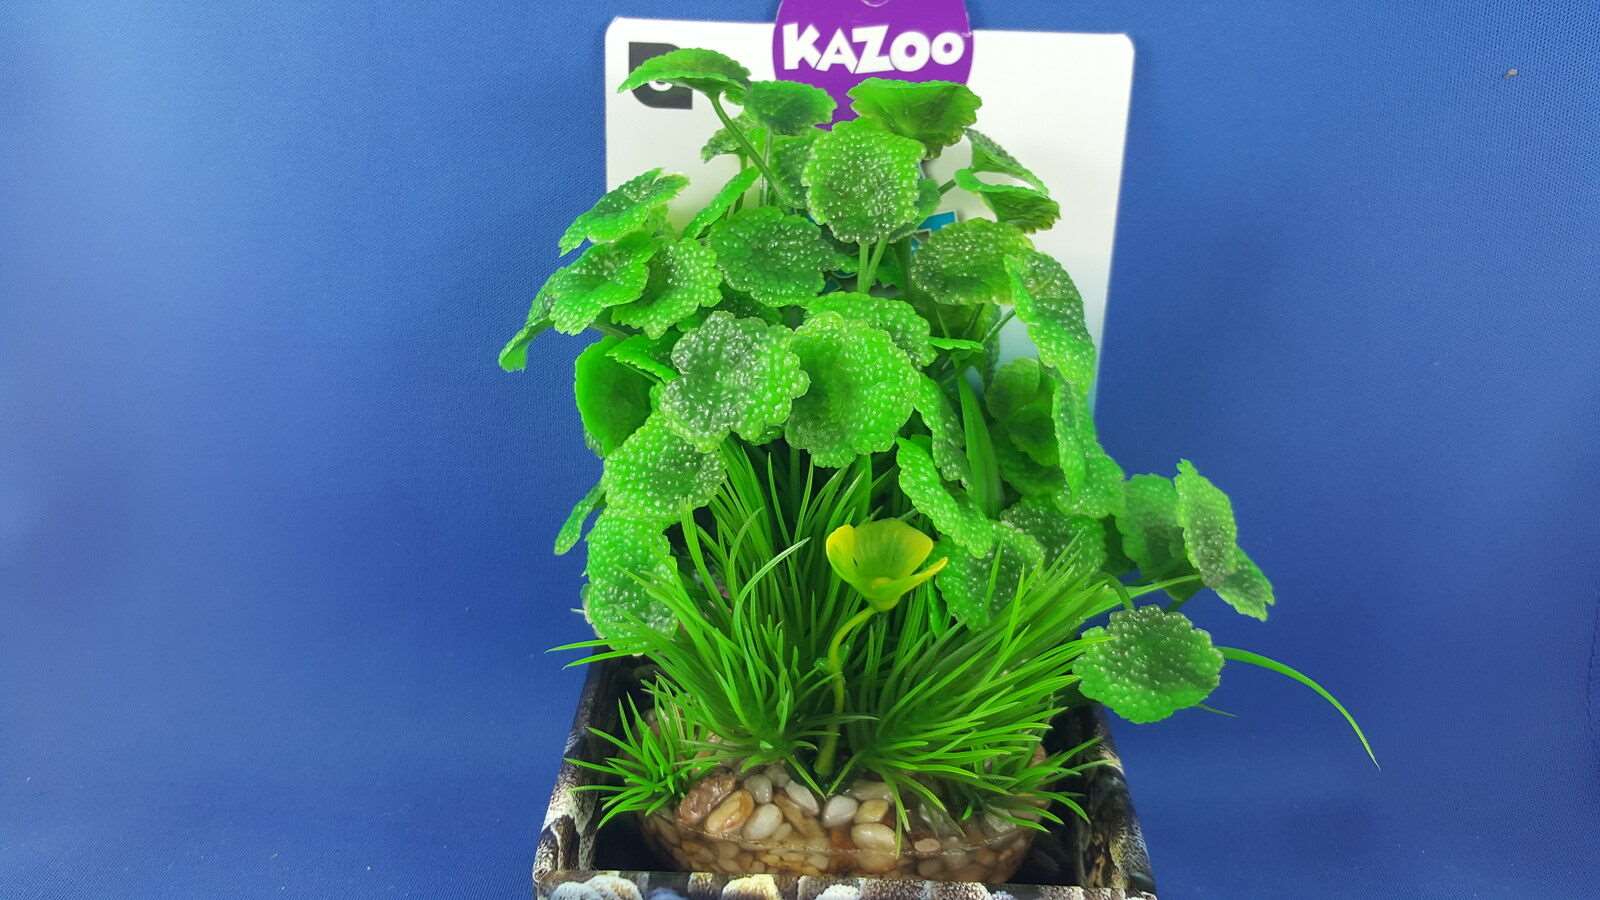 New Kazoo aquarium plant, small, assorted green leaves with solid pebble base